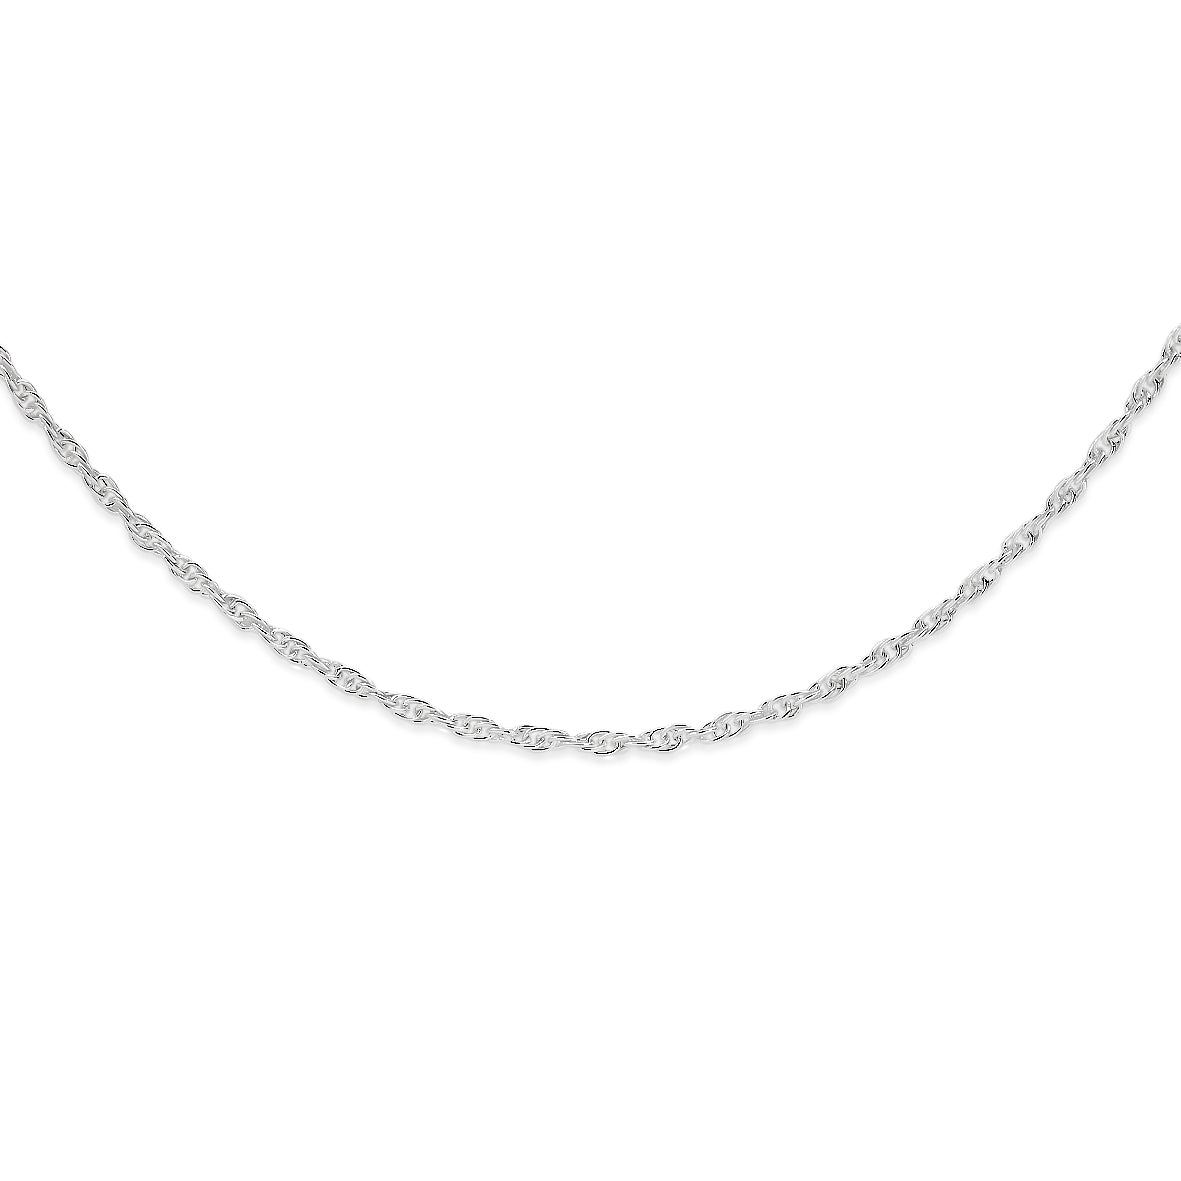 Sterling silver double cable link chain